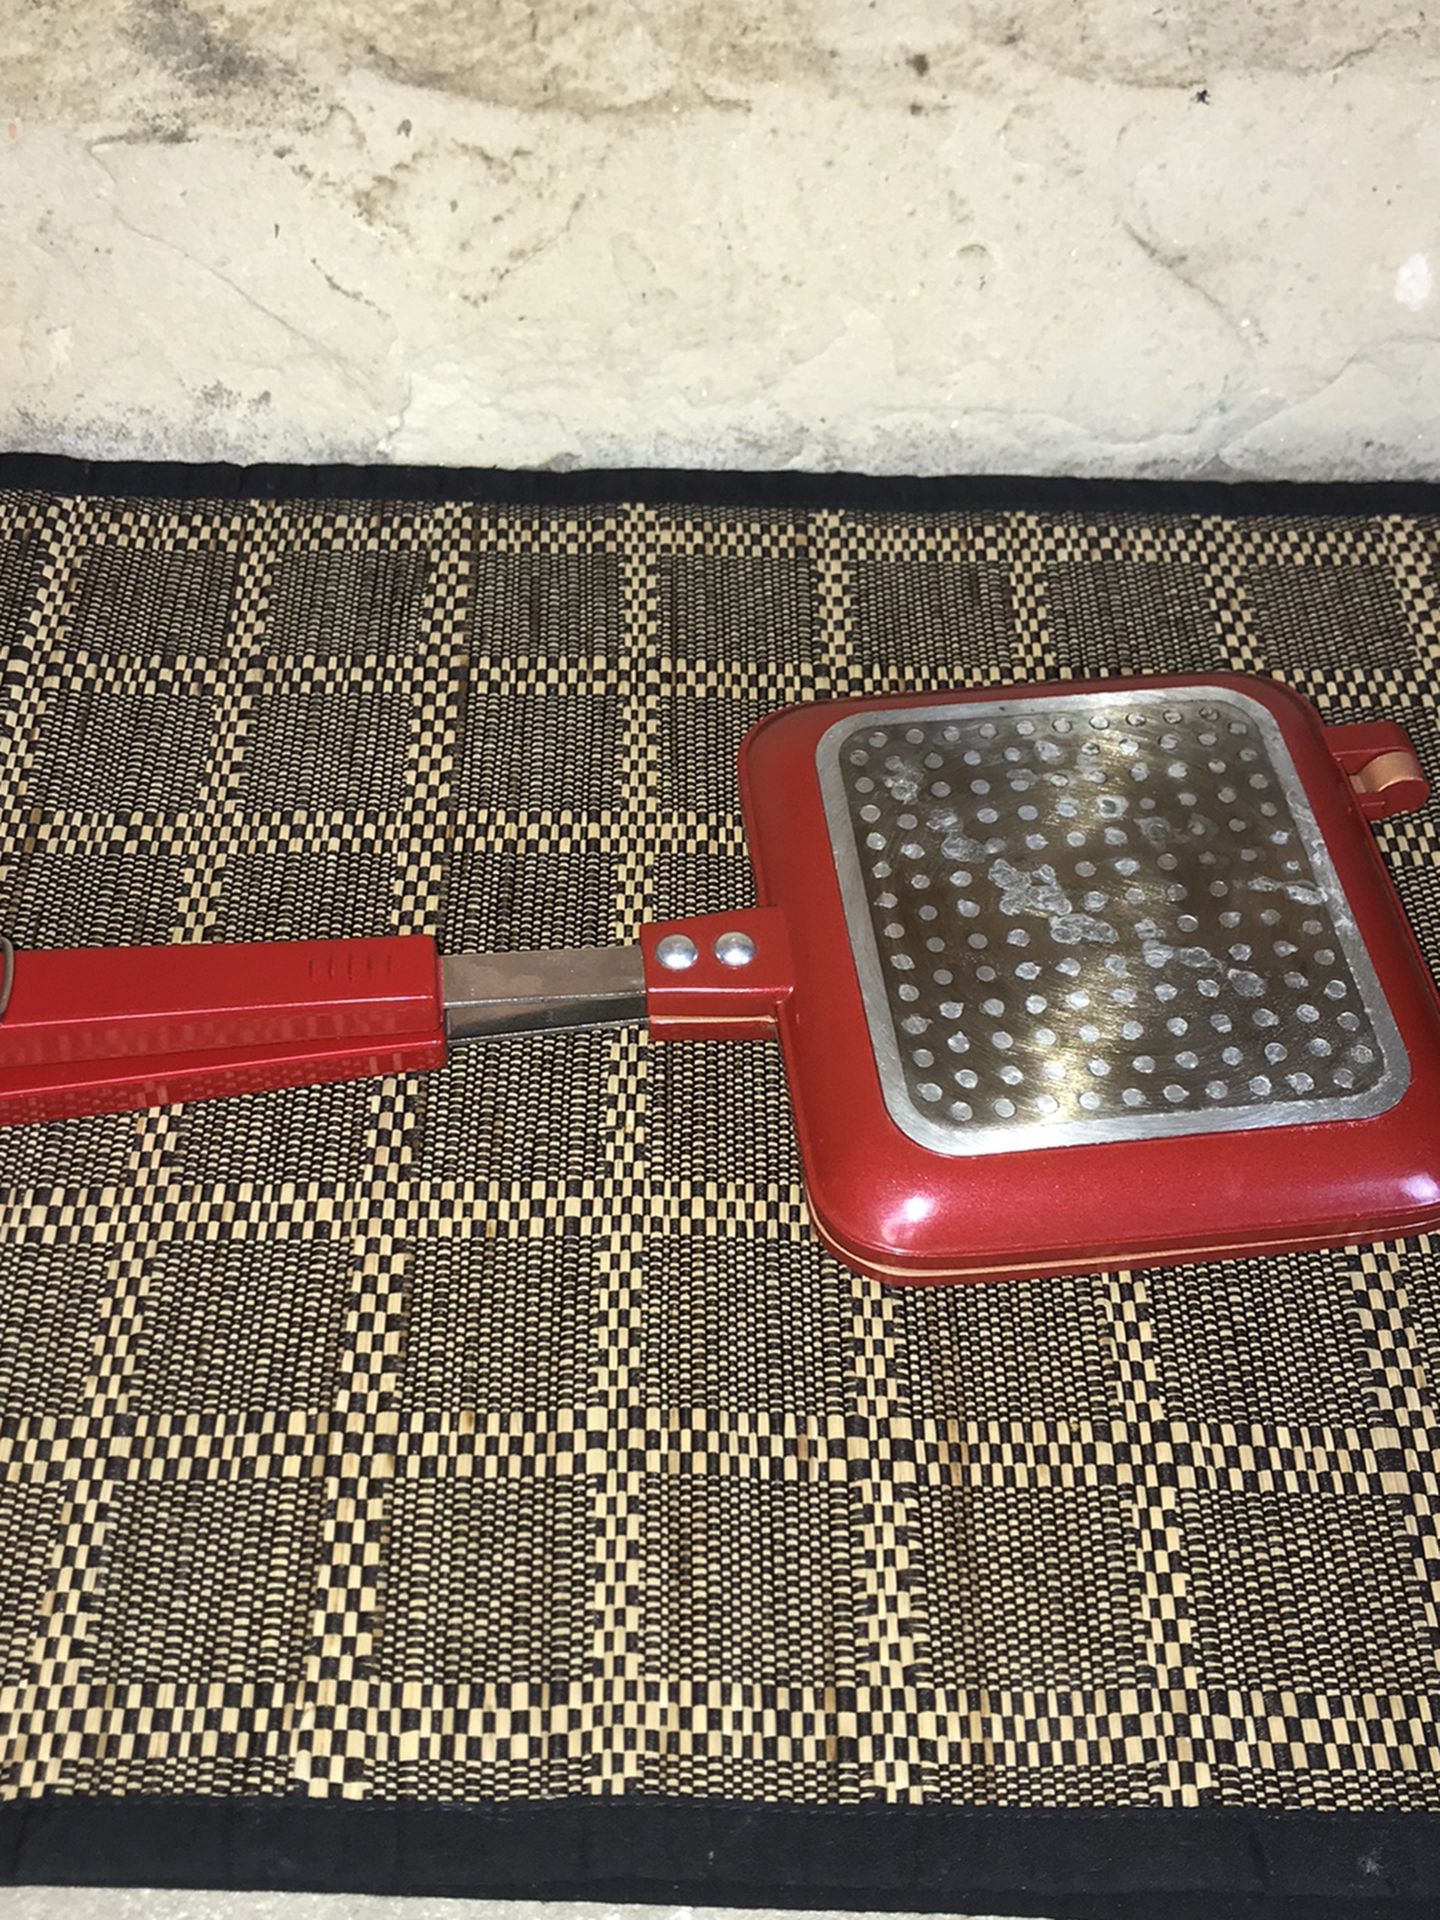 RED COPPER FLIPWICH GRILLED SANDWICH PANINI MAKER PRE-OWNED